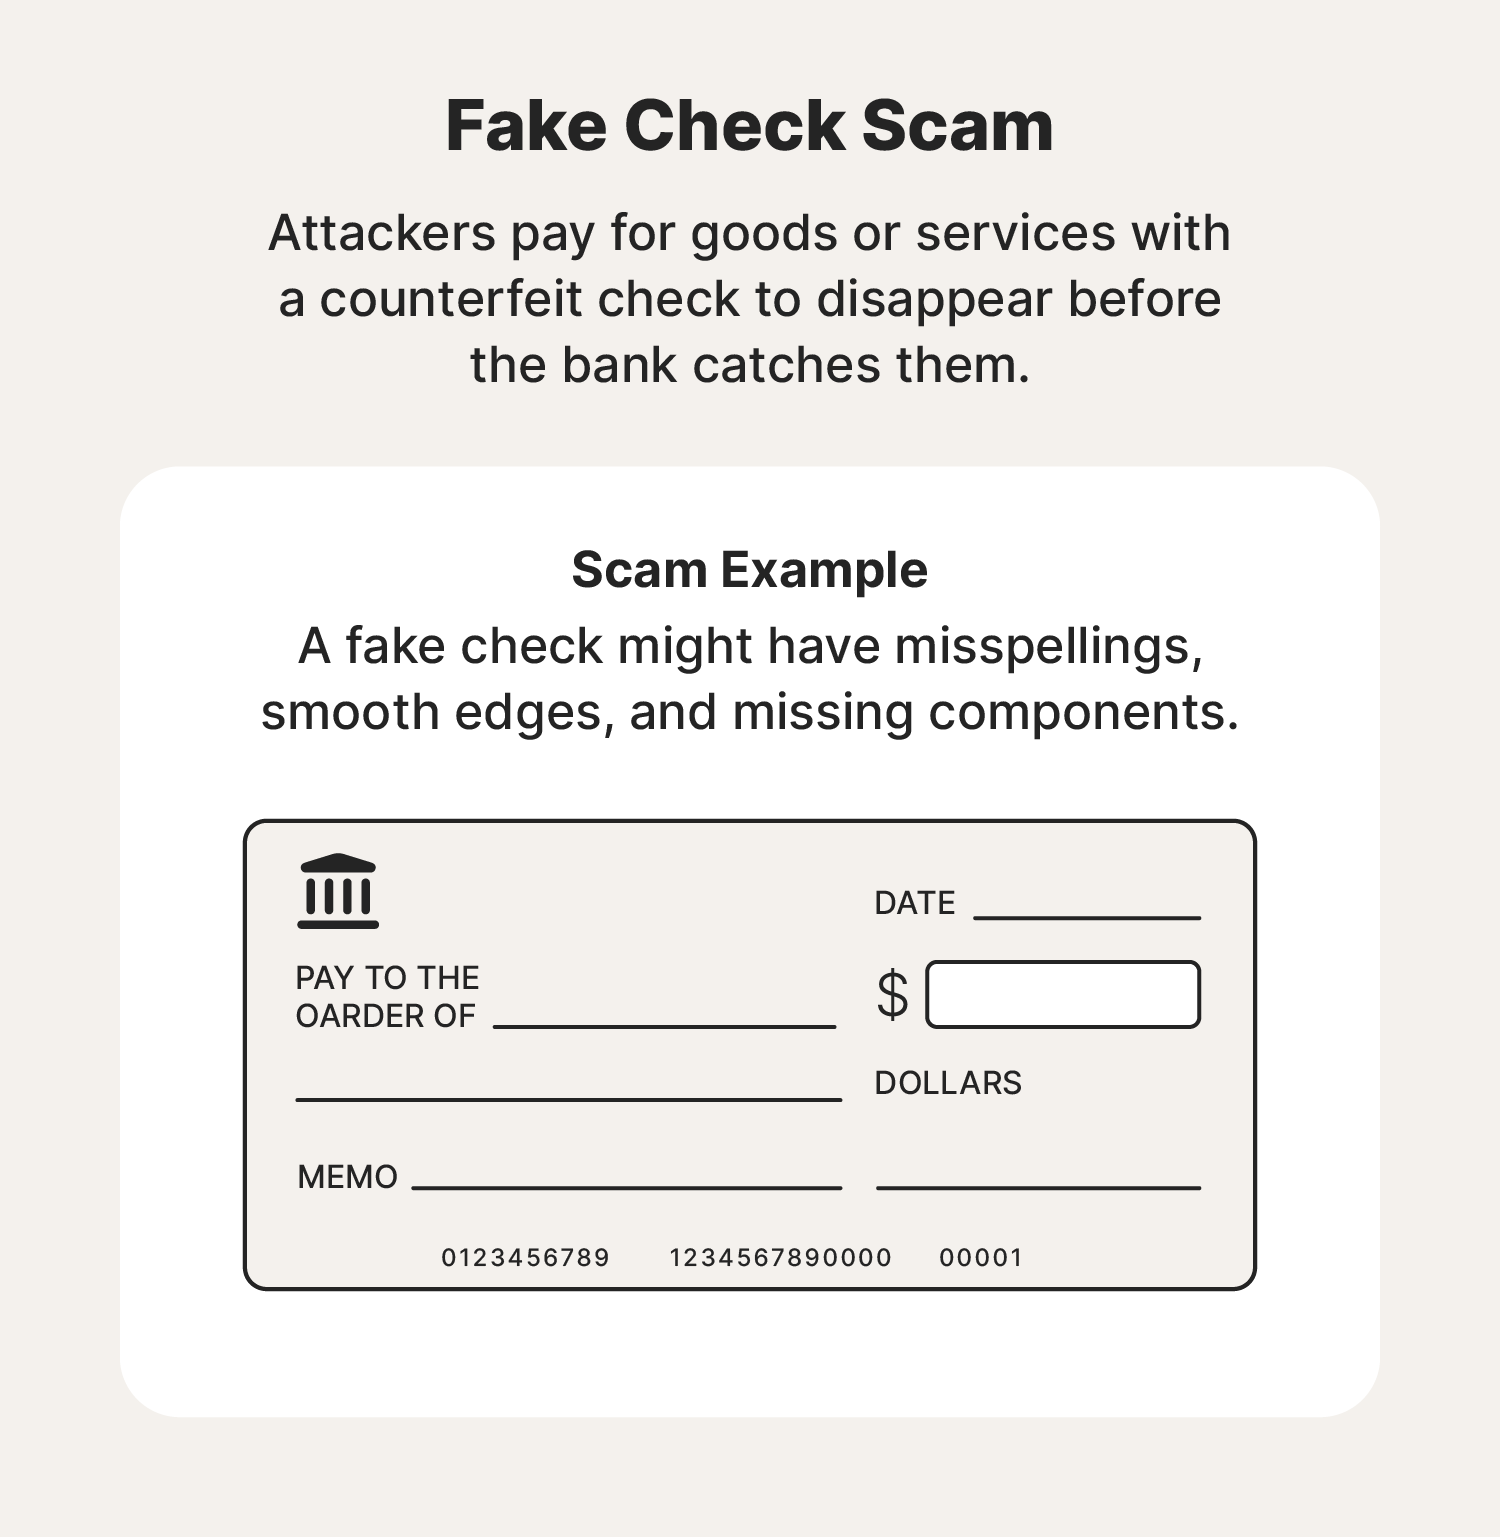 An example of a fake check with missing components that might be used in a bank scam.